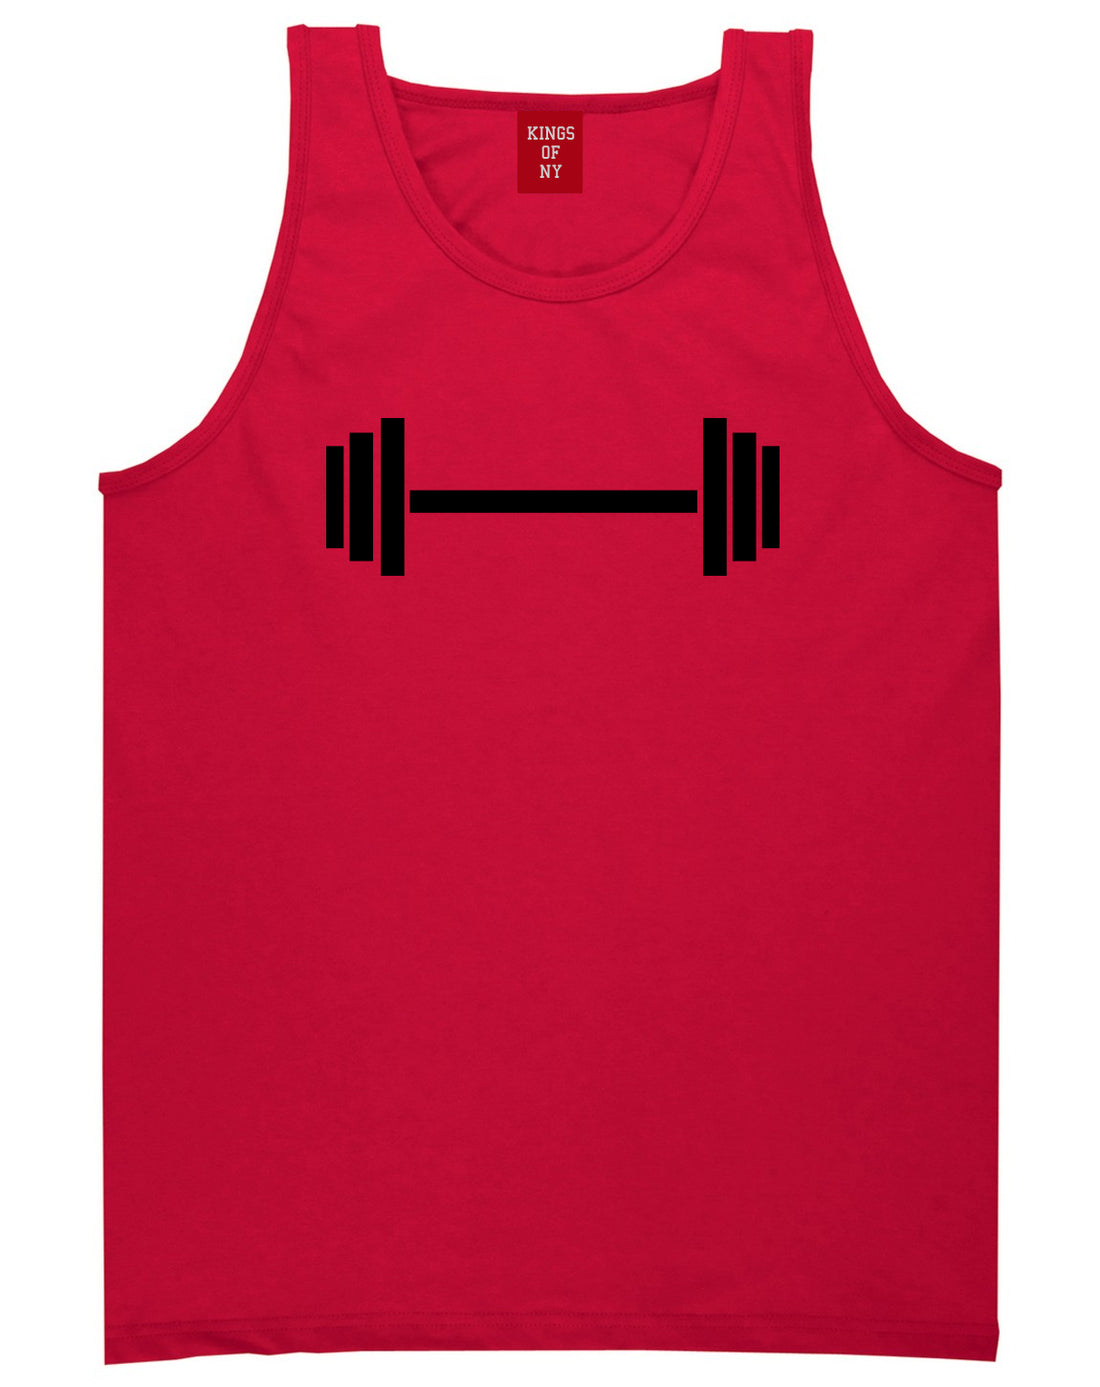 Barbell Workout Gym Red Tank Top Shirt by Kings Of NY